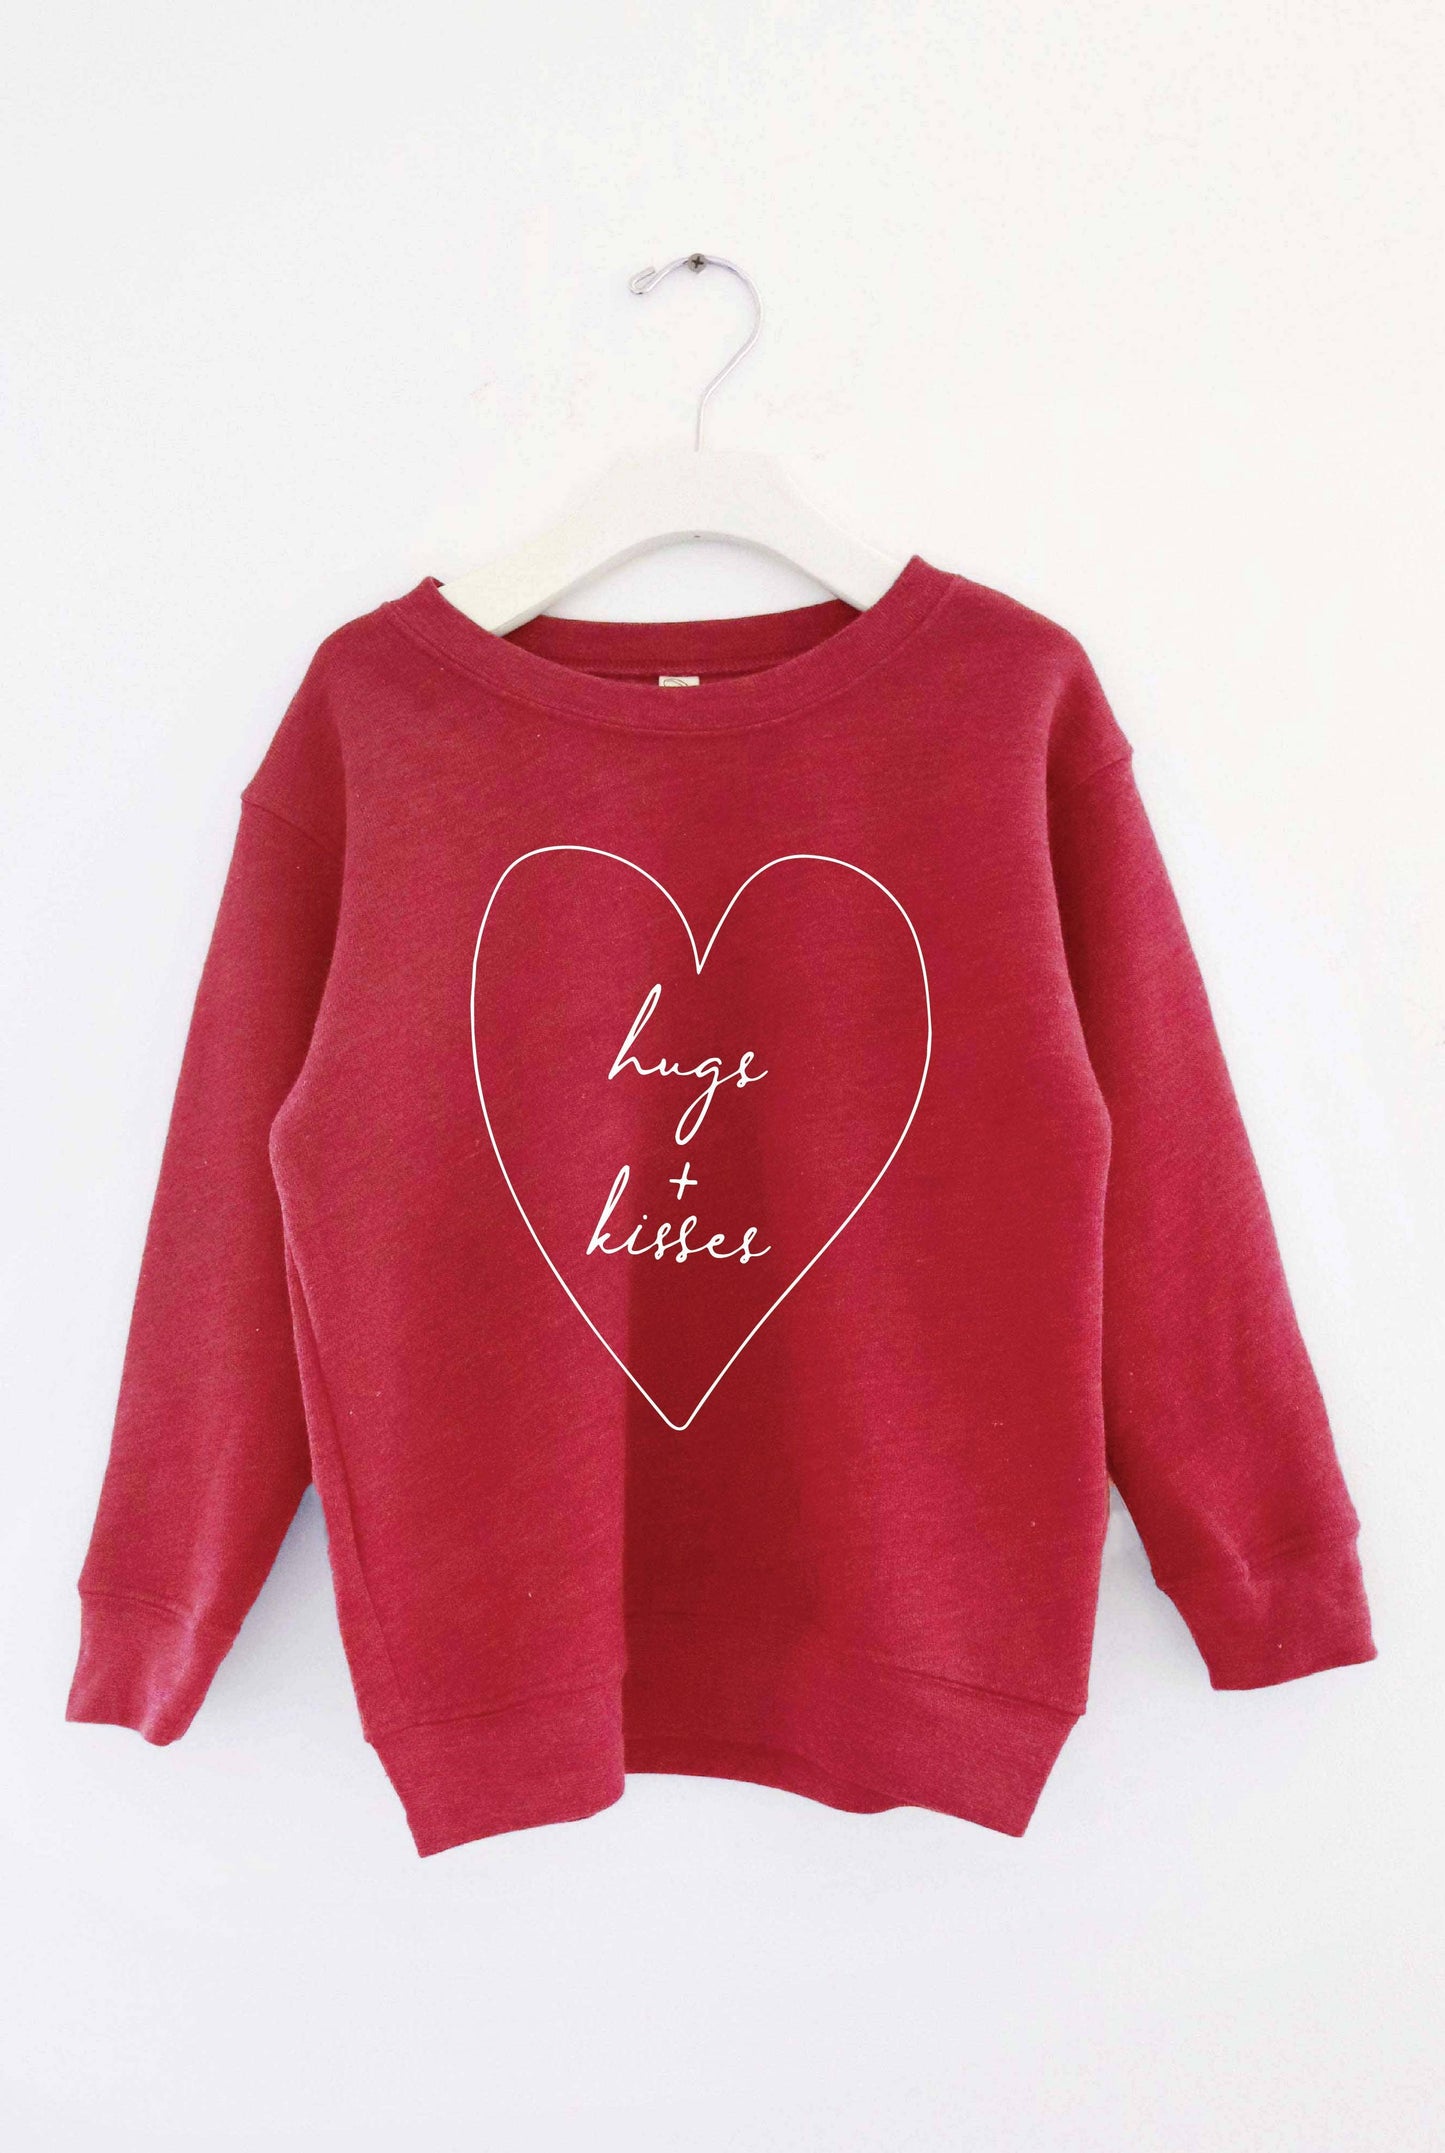 HUGS AND KISSES Toddler Unisex Graphic Sweatshirt: CRANBERRY HEATHER / 3T